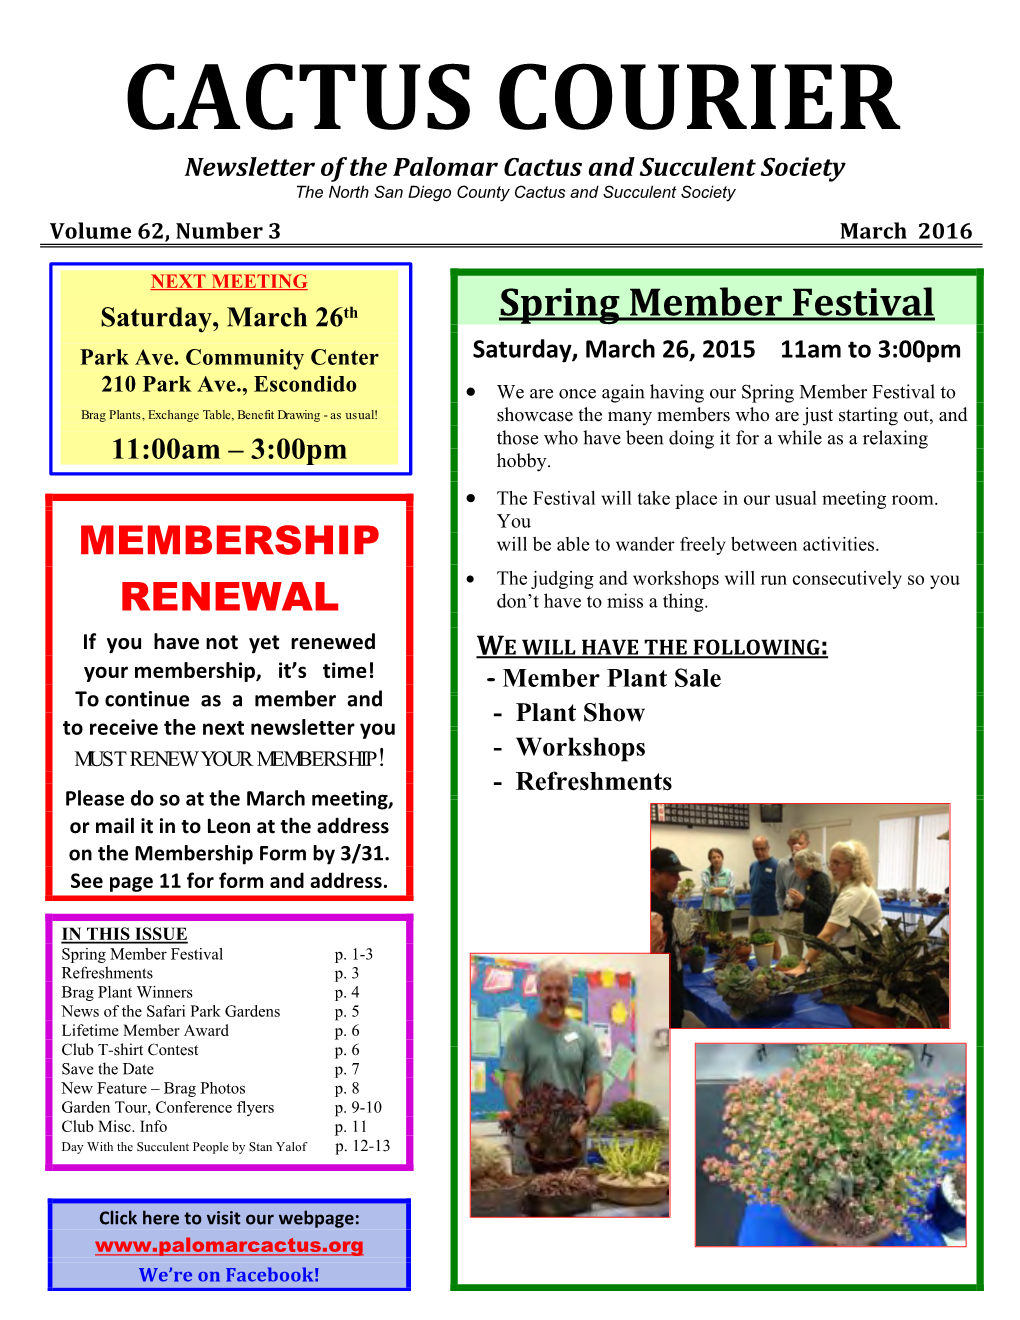 CACTUS COURIER Newsletter of the Palomar Cactus and Succulent Society the North San Diego County Cactus and Succulent Society